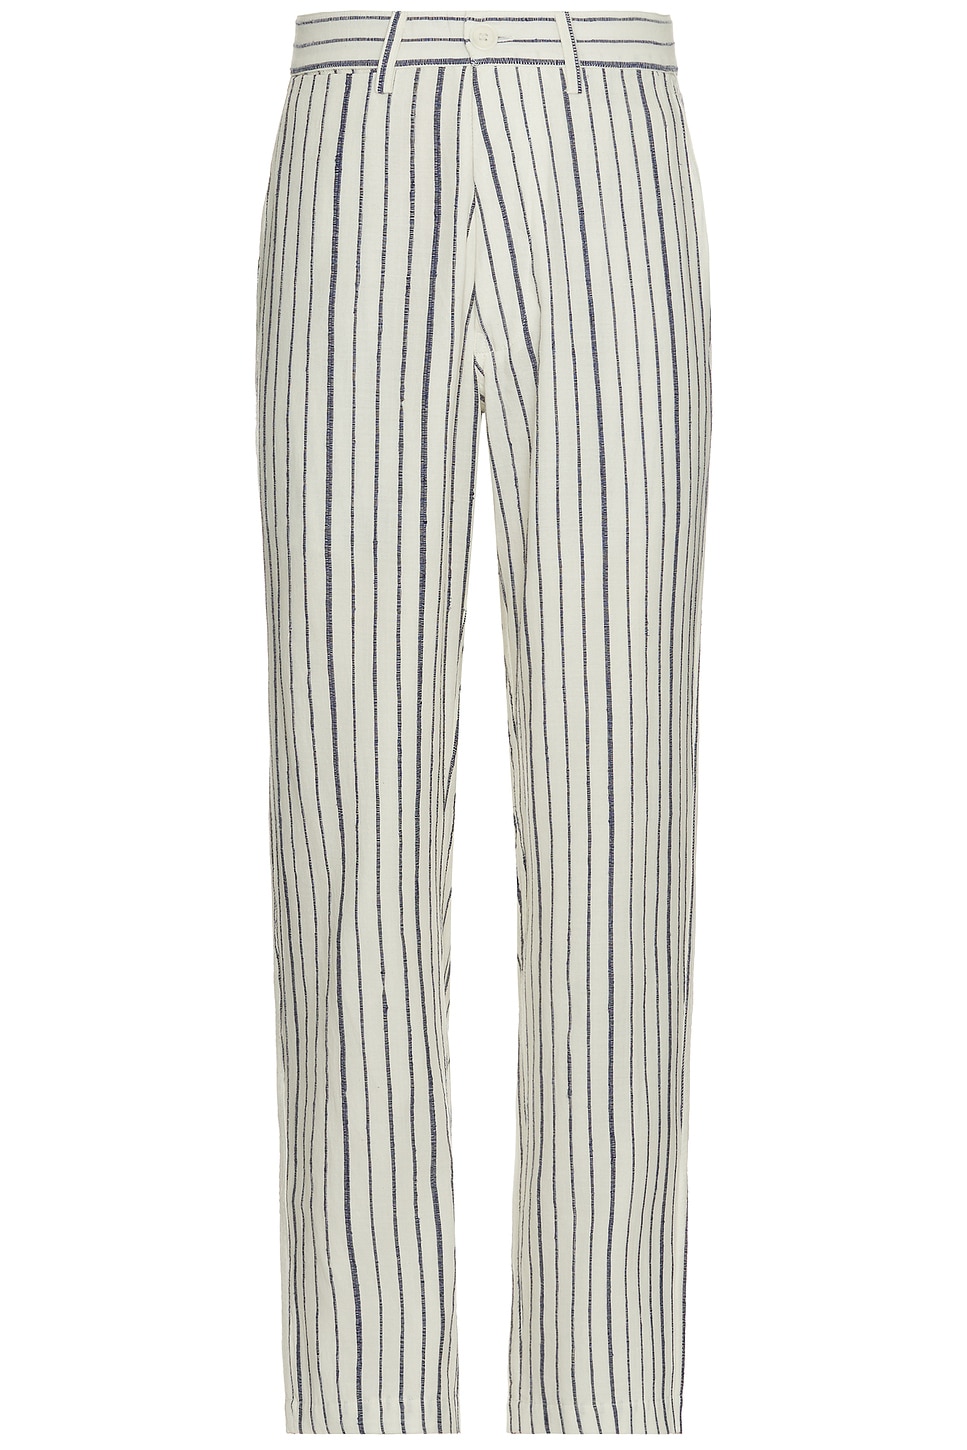 Thomas Trouser in Ivory